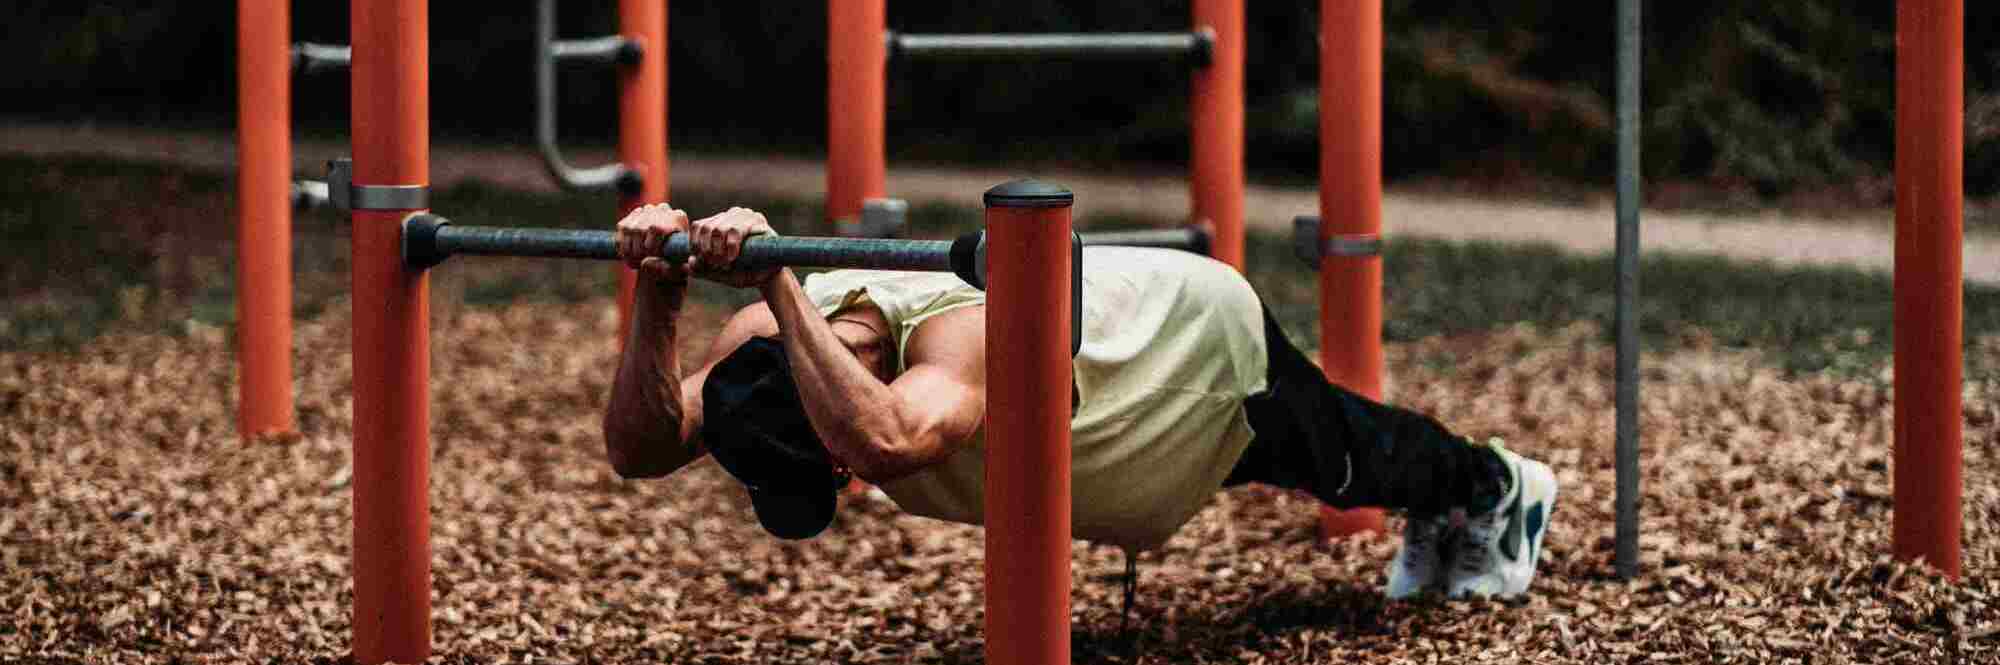 Can You Build Muscle With Calisthenics